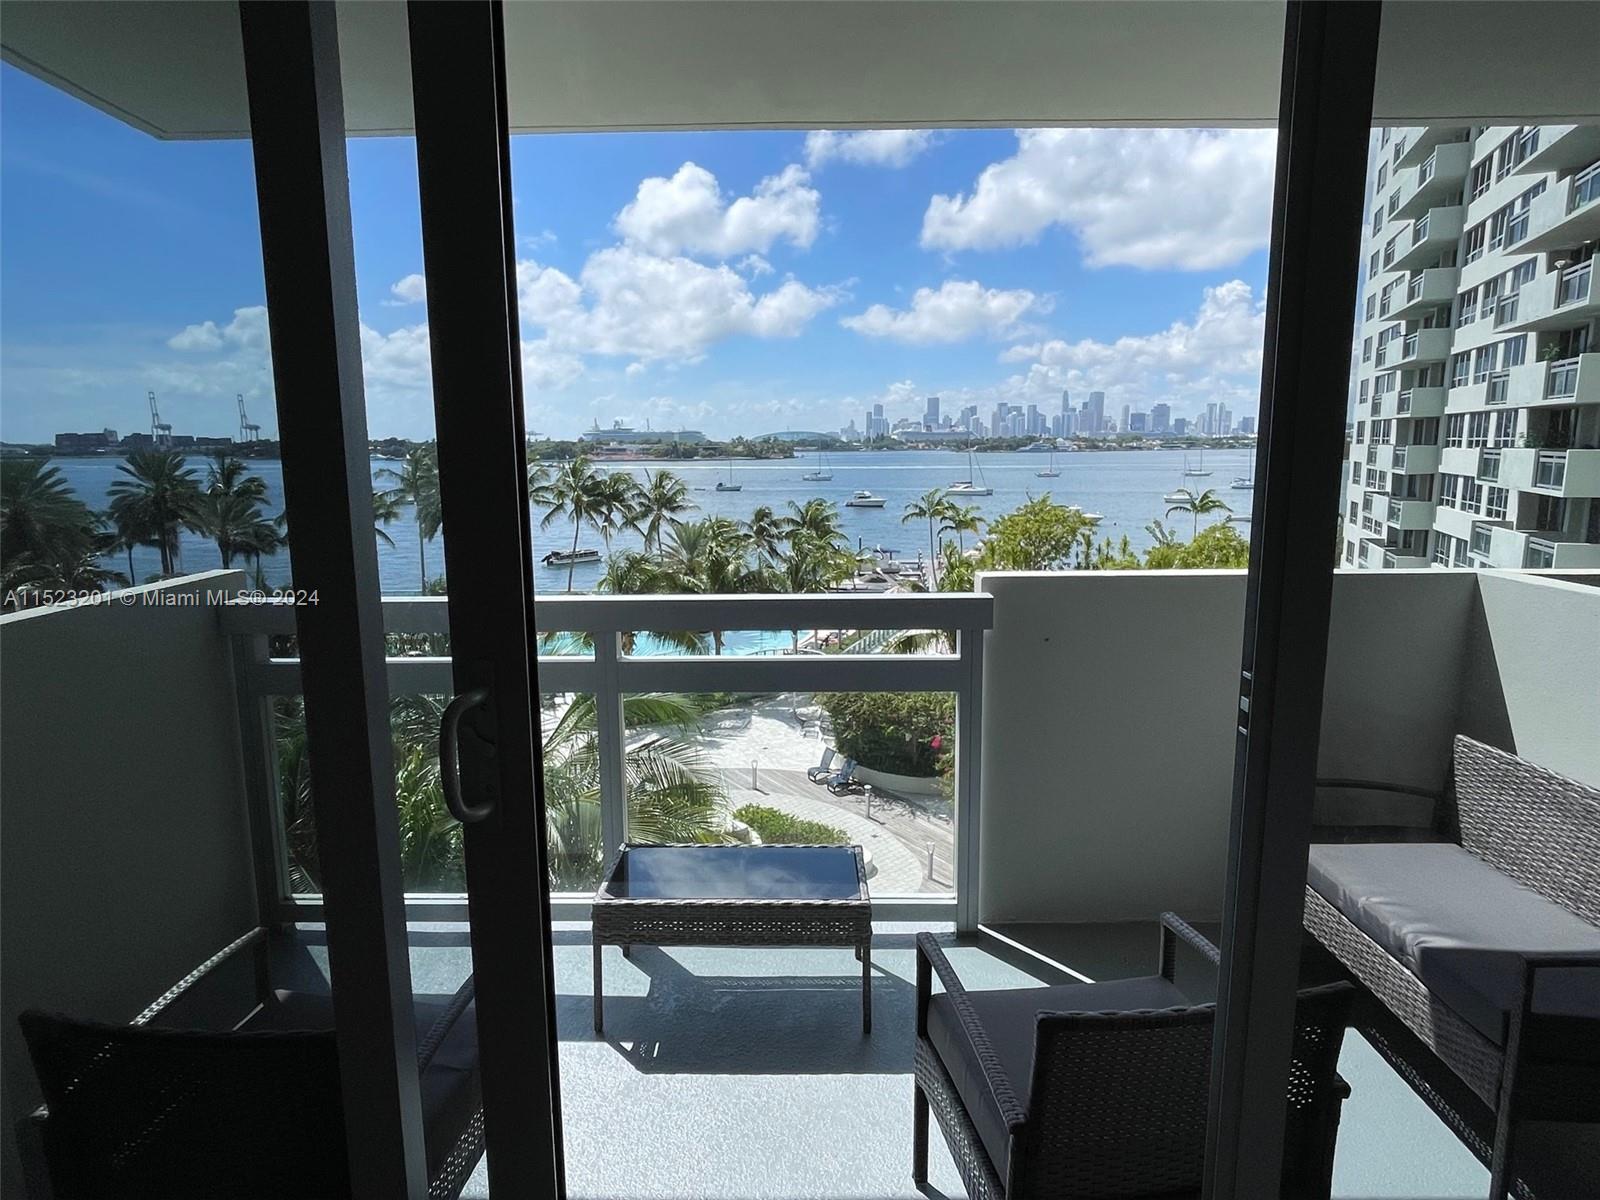 2bed/2bath unit with Amazing Views of the Bay & Downtown Skyline. Rented w/ Furniture. Walking distance to Lincoln Road & minutes from the beach. Amenities include security, Infinity Pool/Spa, Jacuzzi, World Class Fitness Center w/ yoga, spinning, boot ca mp classes, day spa/salon, restaurant w/ full bar providing pool lounge service, , doggy day care, on-site dry cleaners & market/liquor store. Take a jog/walk on the boardwalk. Relax at the newly renovated Pool with Cabanas!
Building allows MONTHLY RENTALS. THE RATE DEPENDING ON LENGTH OF STAY AND SEASON! Available from August 1st'24